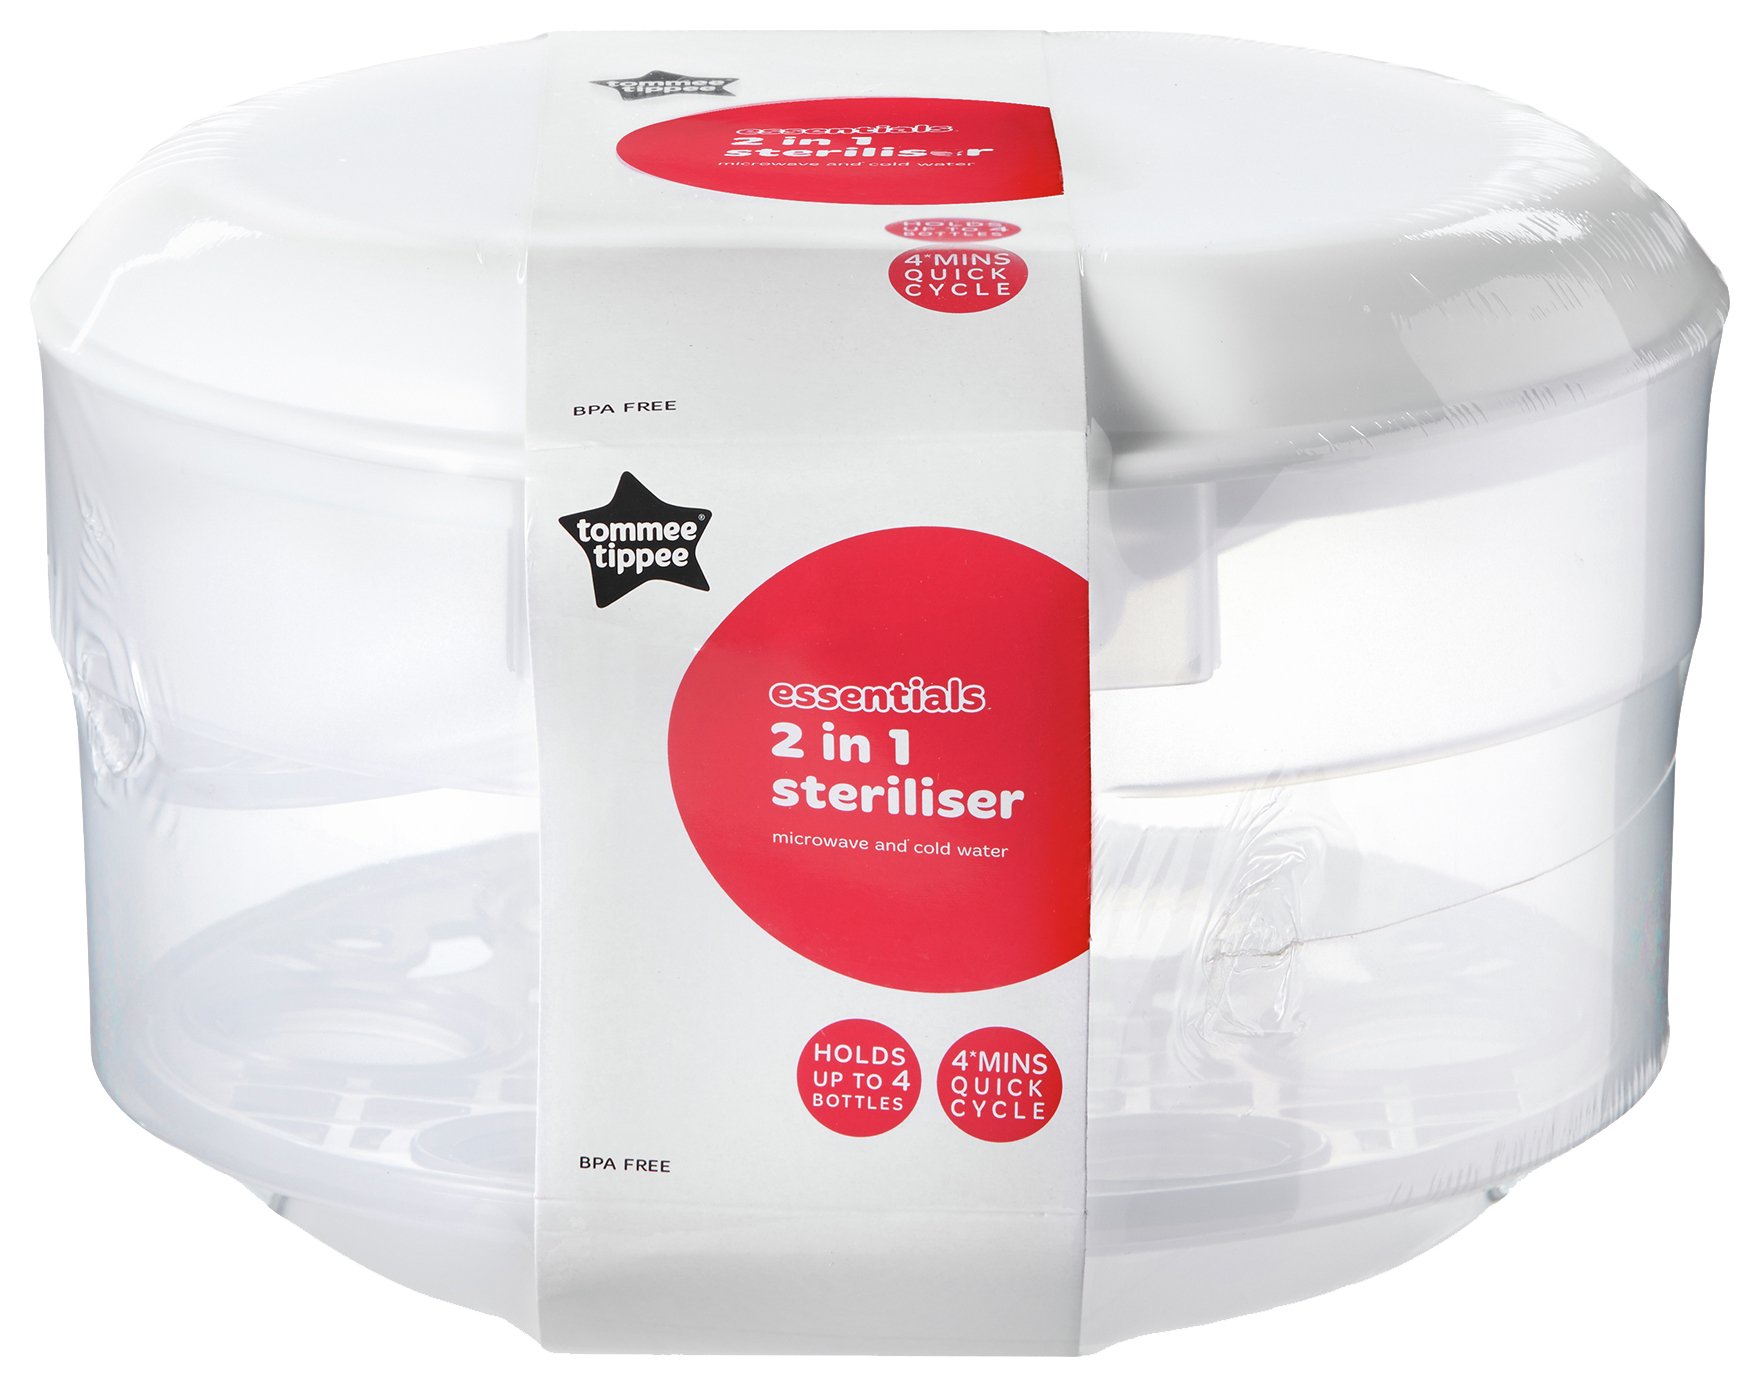 Tommee Tippee Essentials 2-in-1 Steriliser Review